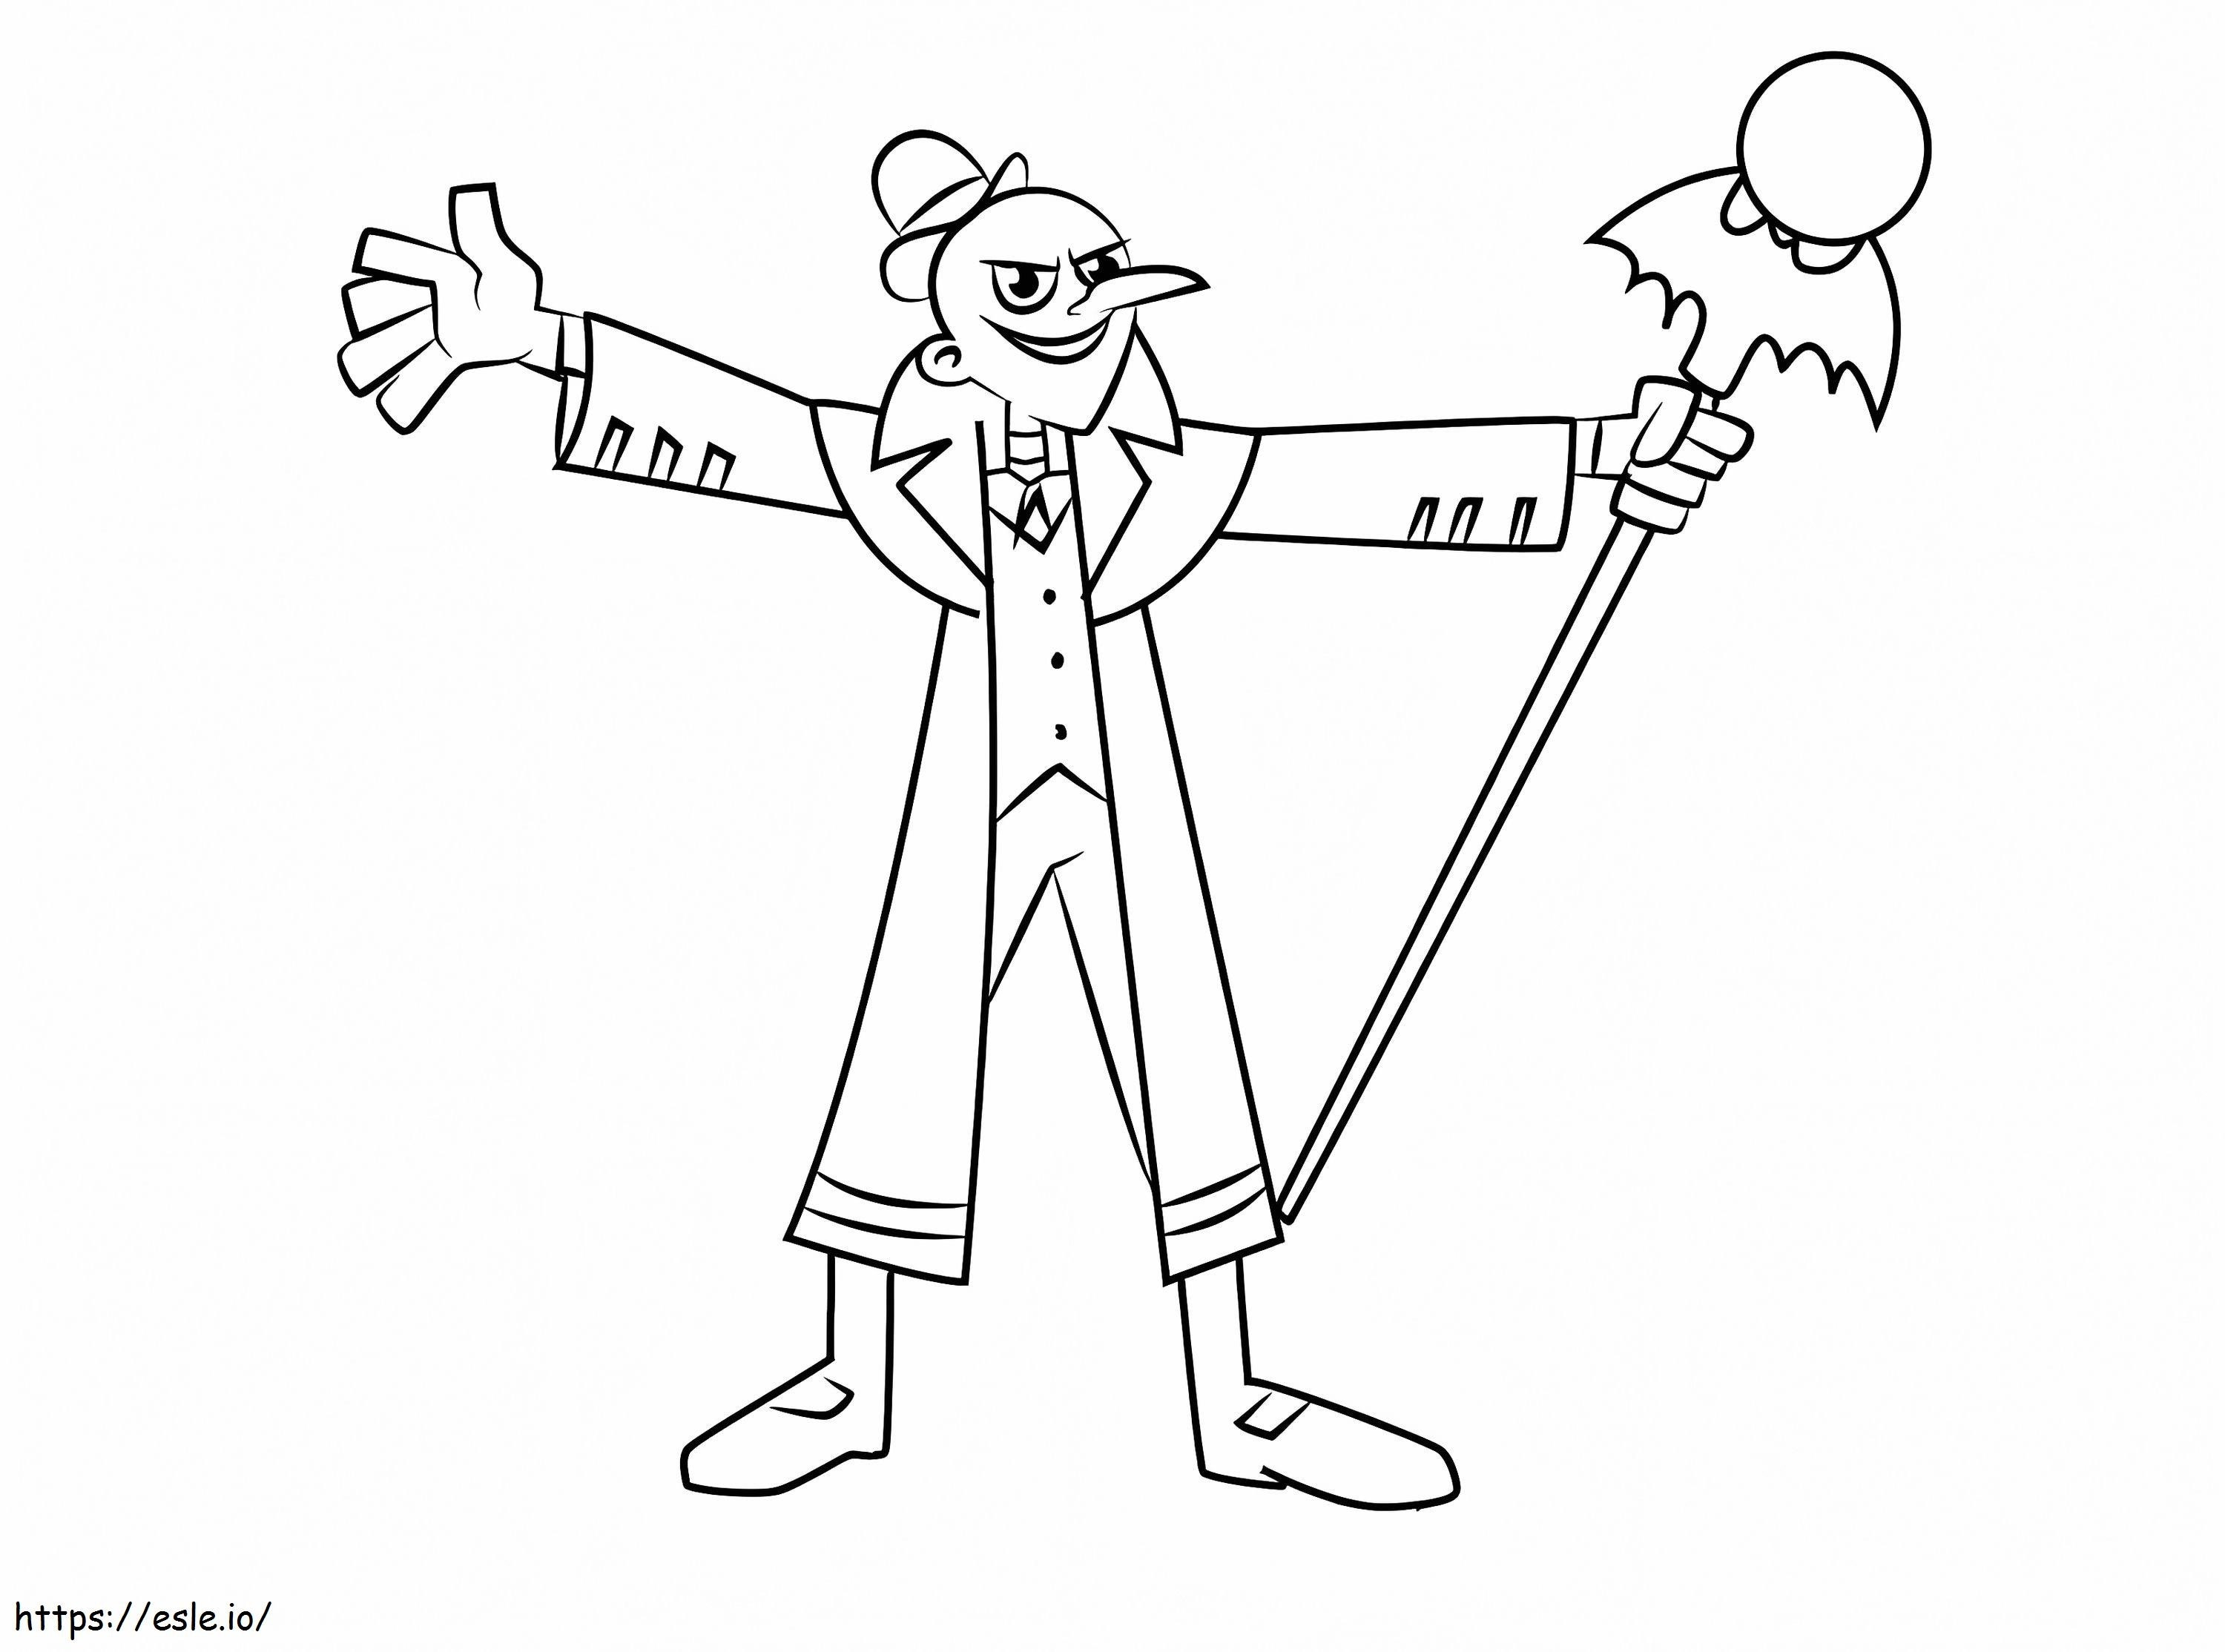 Freakshow coloring page